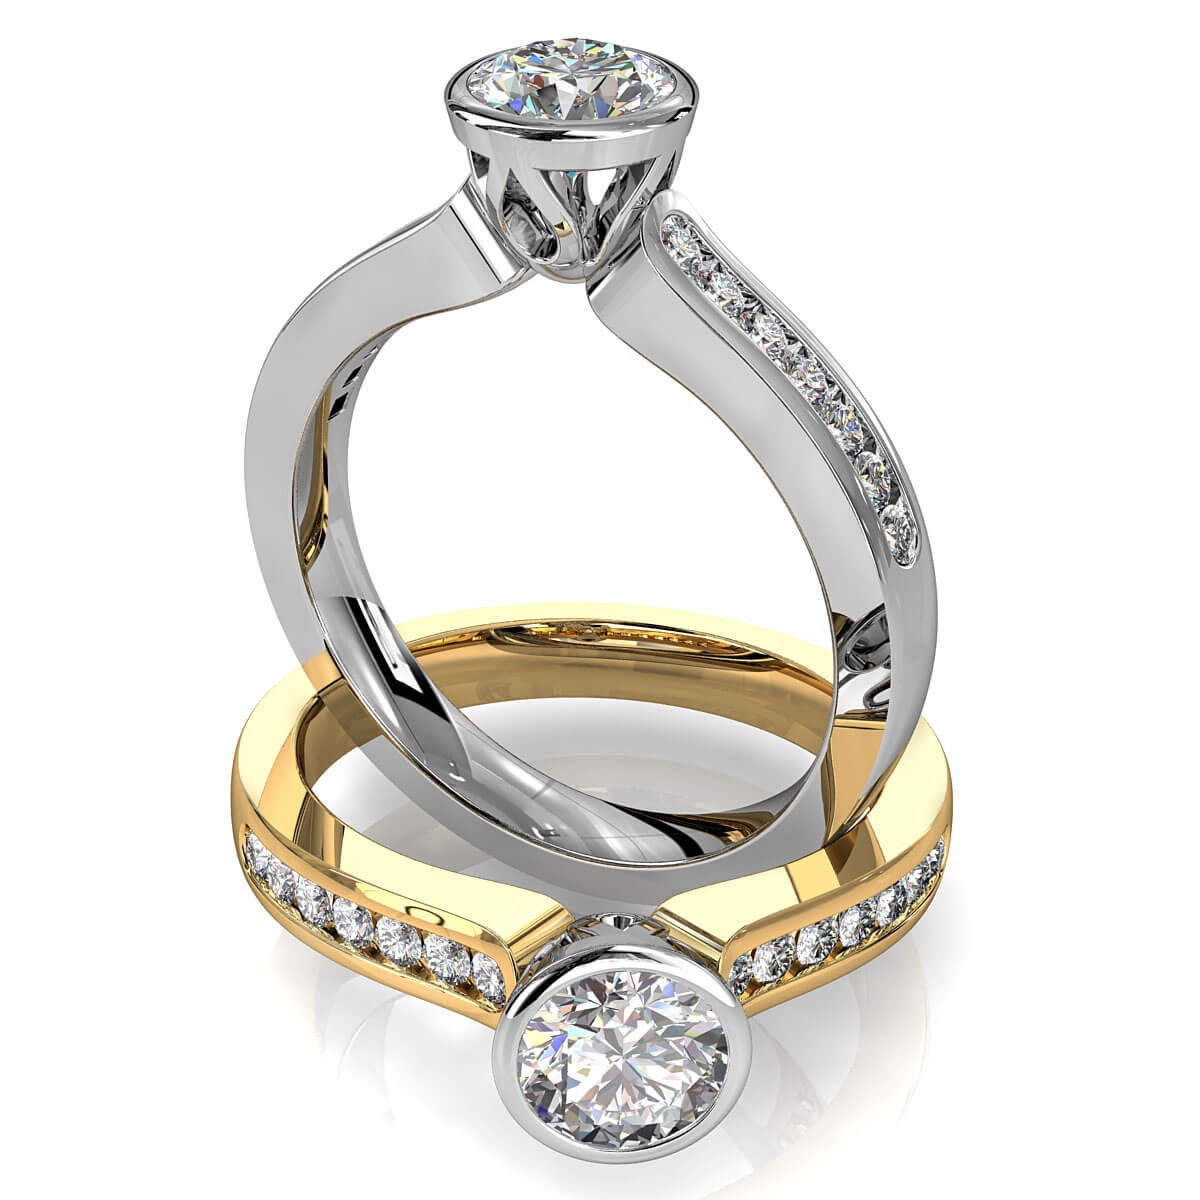 Round Brilliant Cut Diamond Solitaire Engagement Ring, Bezel Set on a Channel Set Band with Lotus Undersetting.